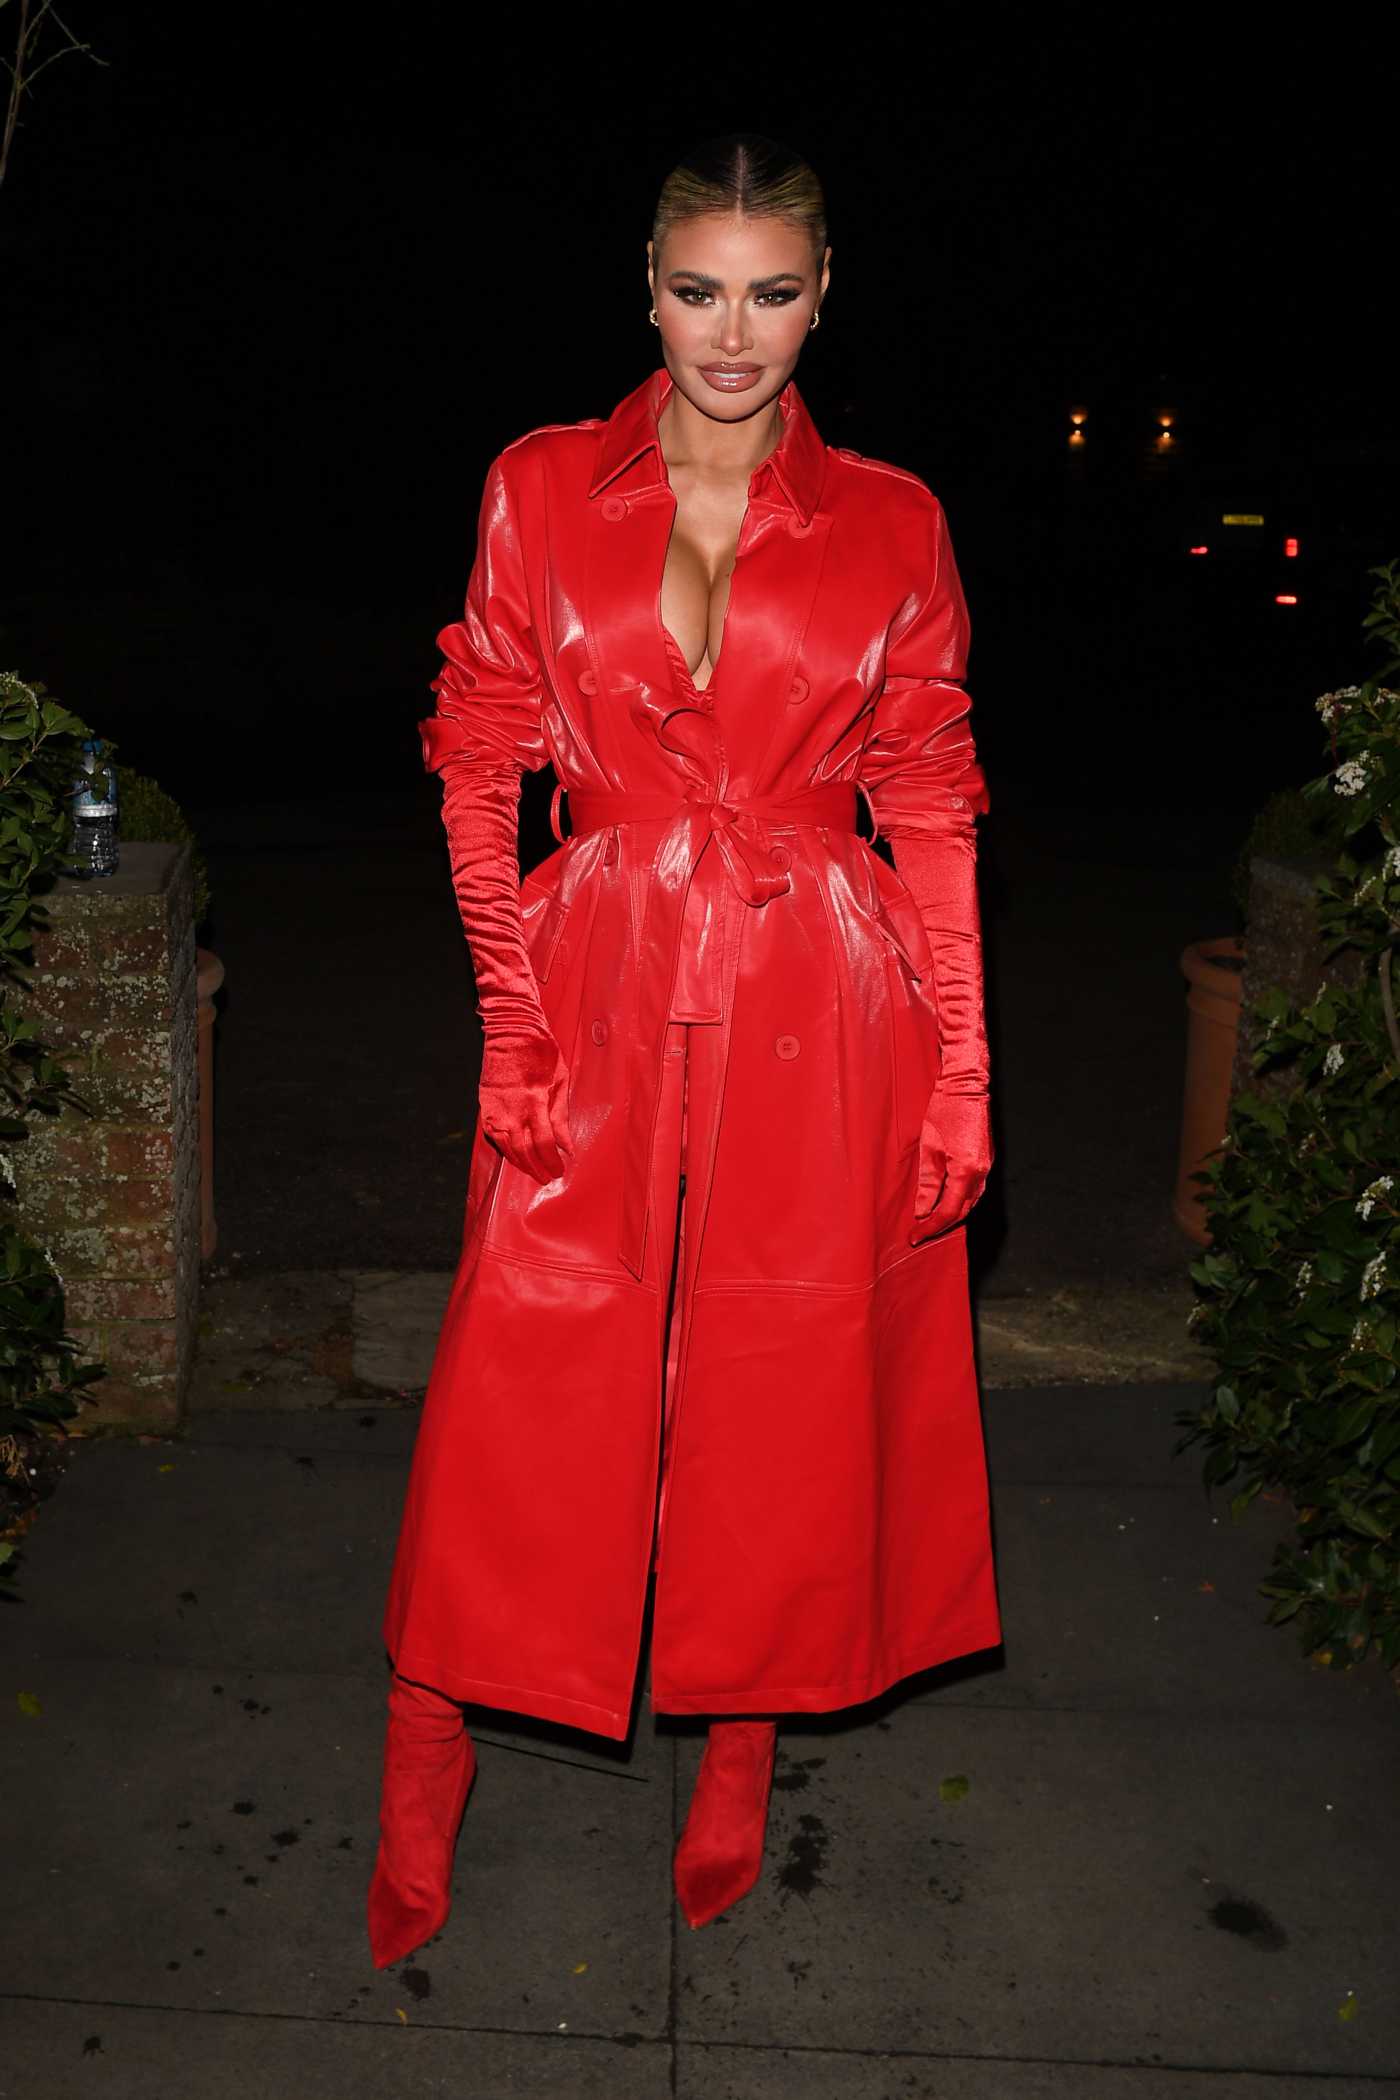 Chloe Sims in a Red Coat Attends The Only Way is Essex TV Show Christmas Special Filming in Essex 12/12/2021